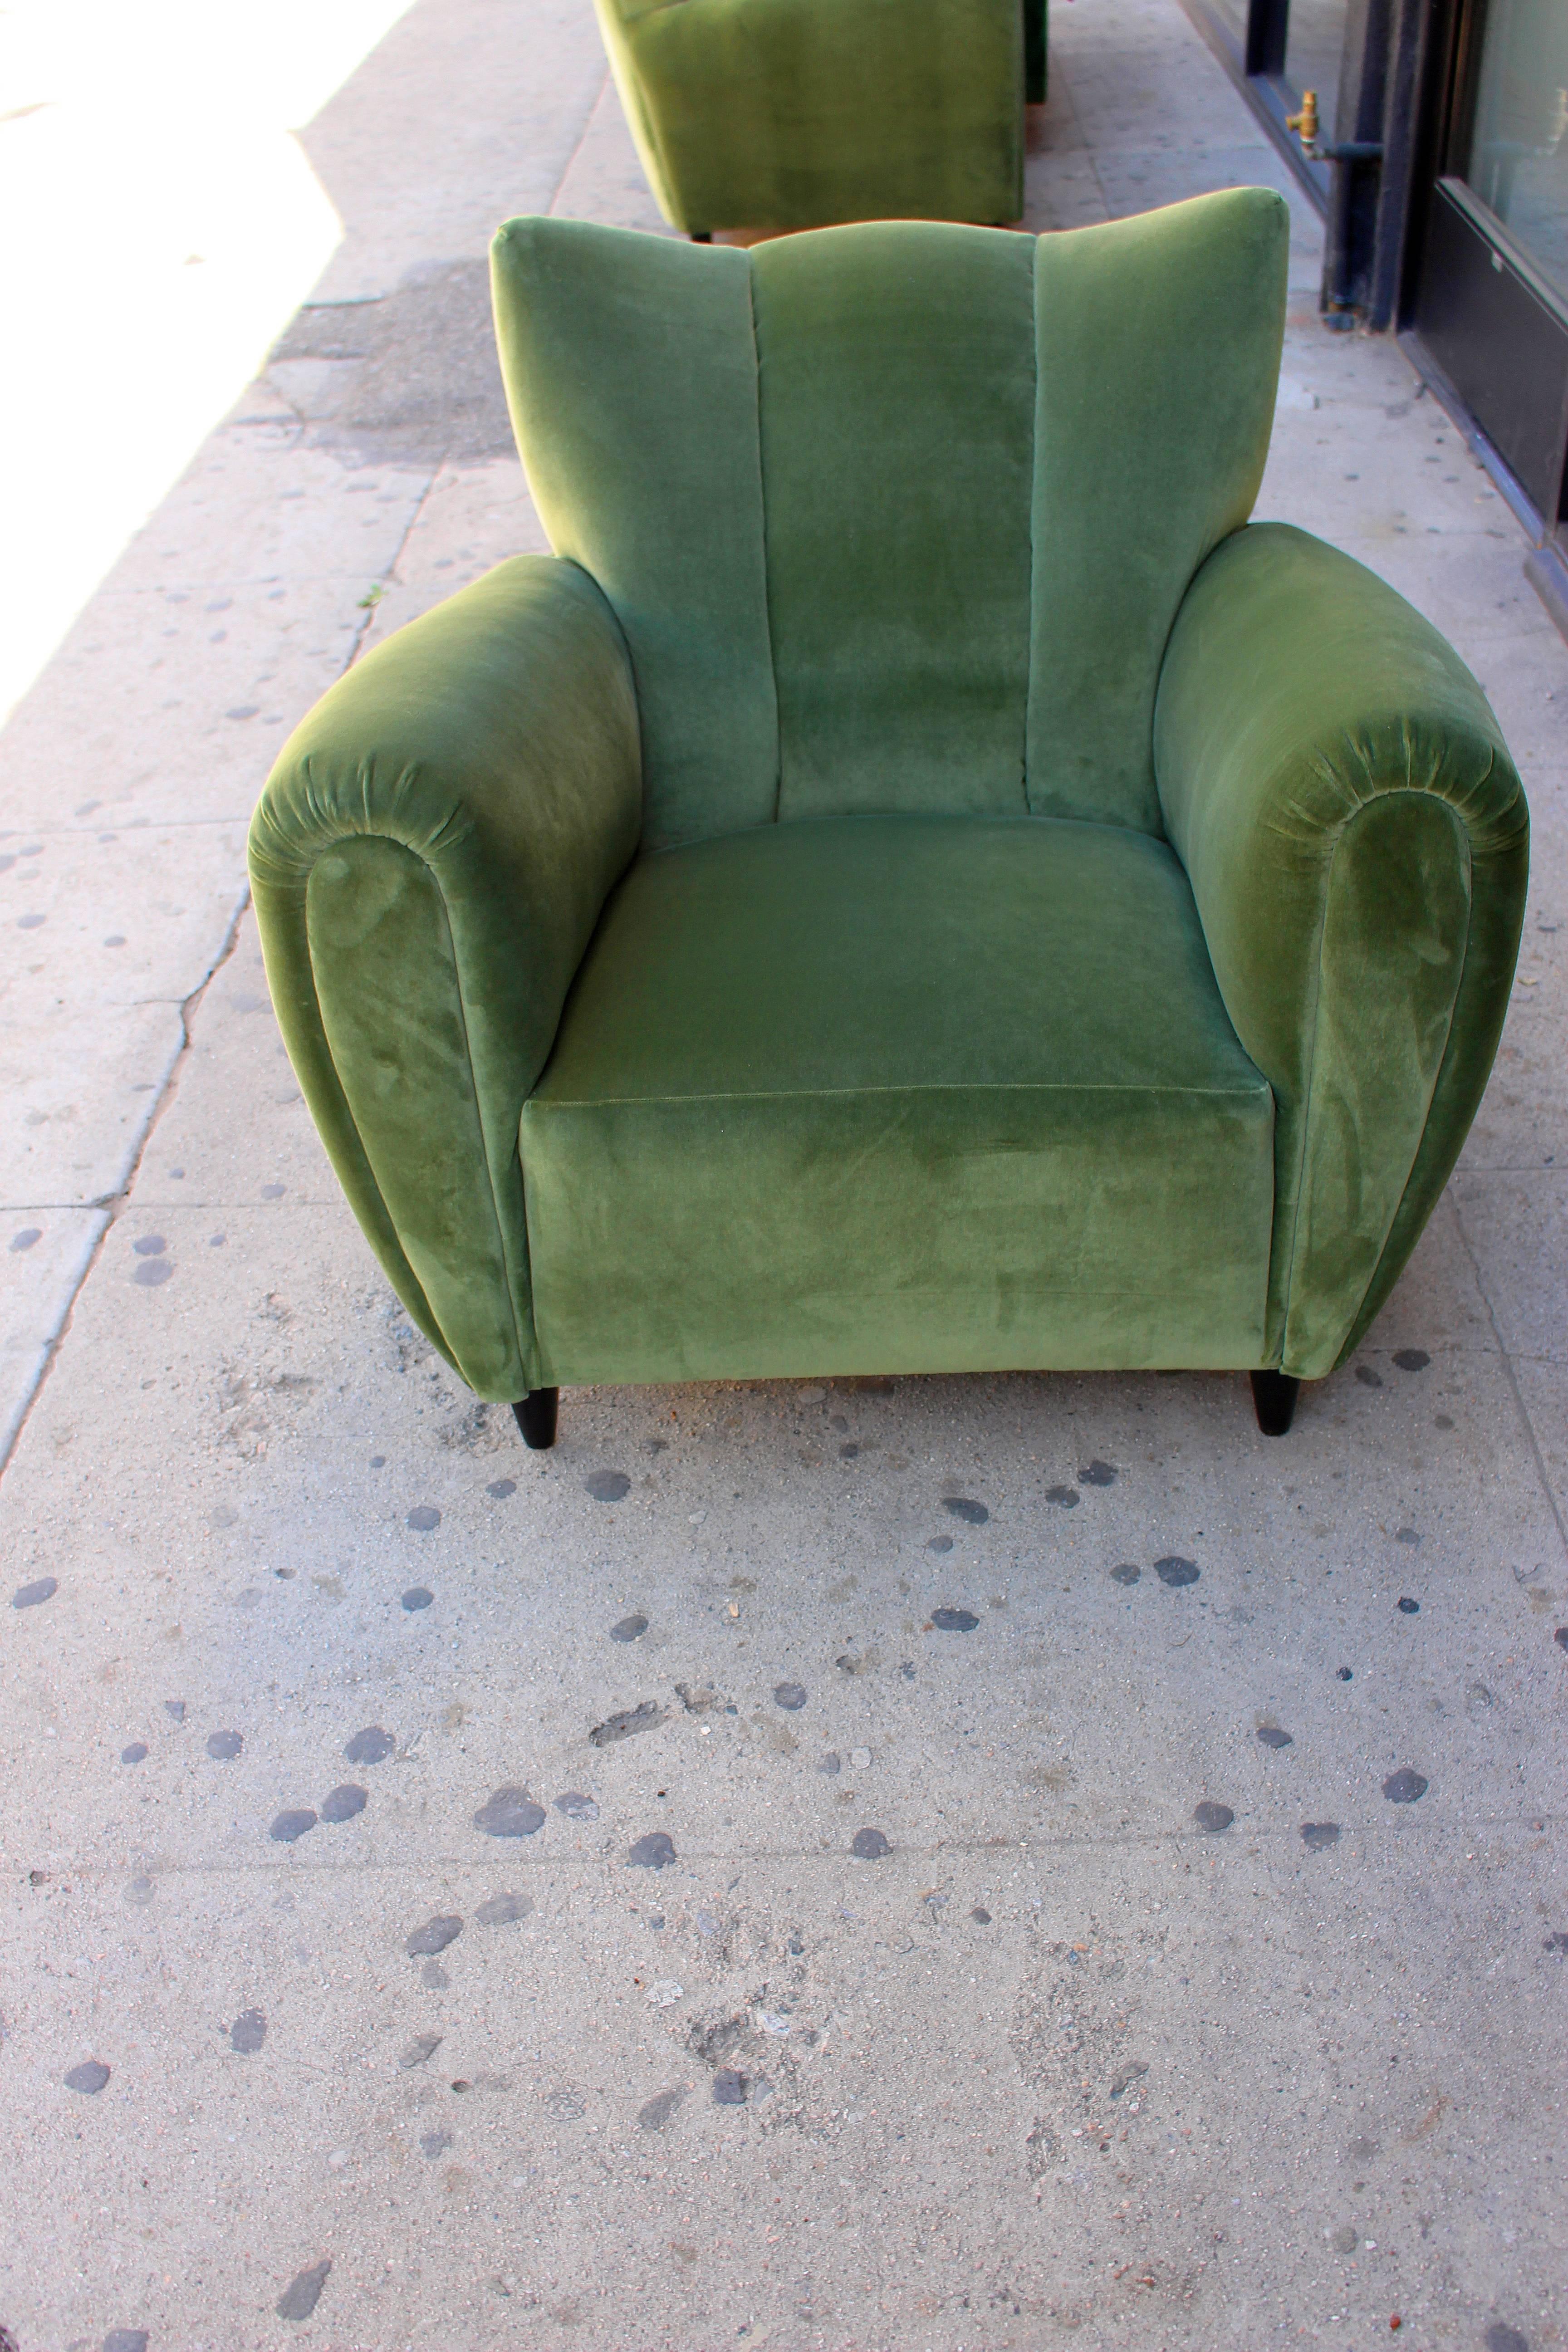 Art Deco new reupholstered pair of chairs design attributed to Guglielmo Ulrich, 1930s.

Pls note: Item is located at Beverly Store
7274 Beverly Blvd 
Los Angeles, CA 90036
